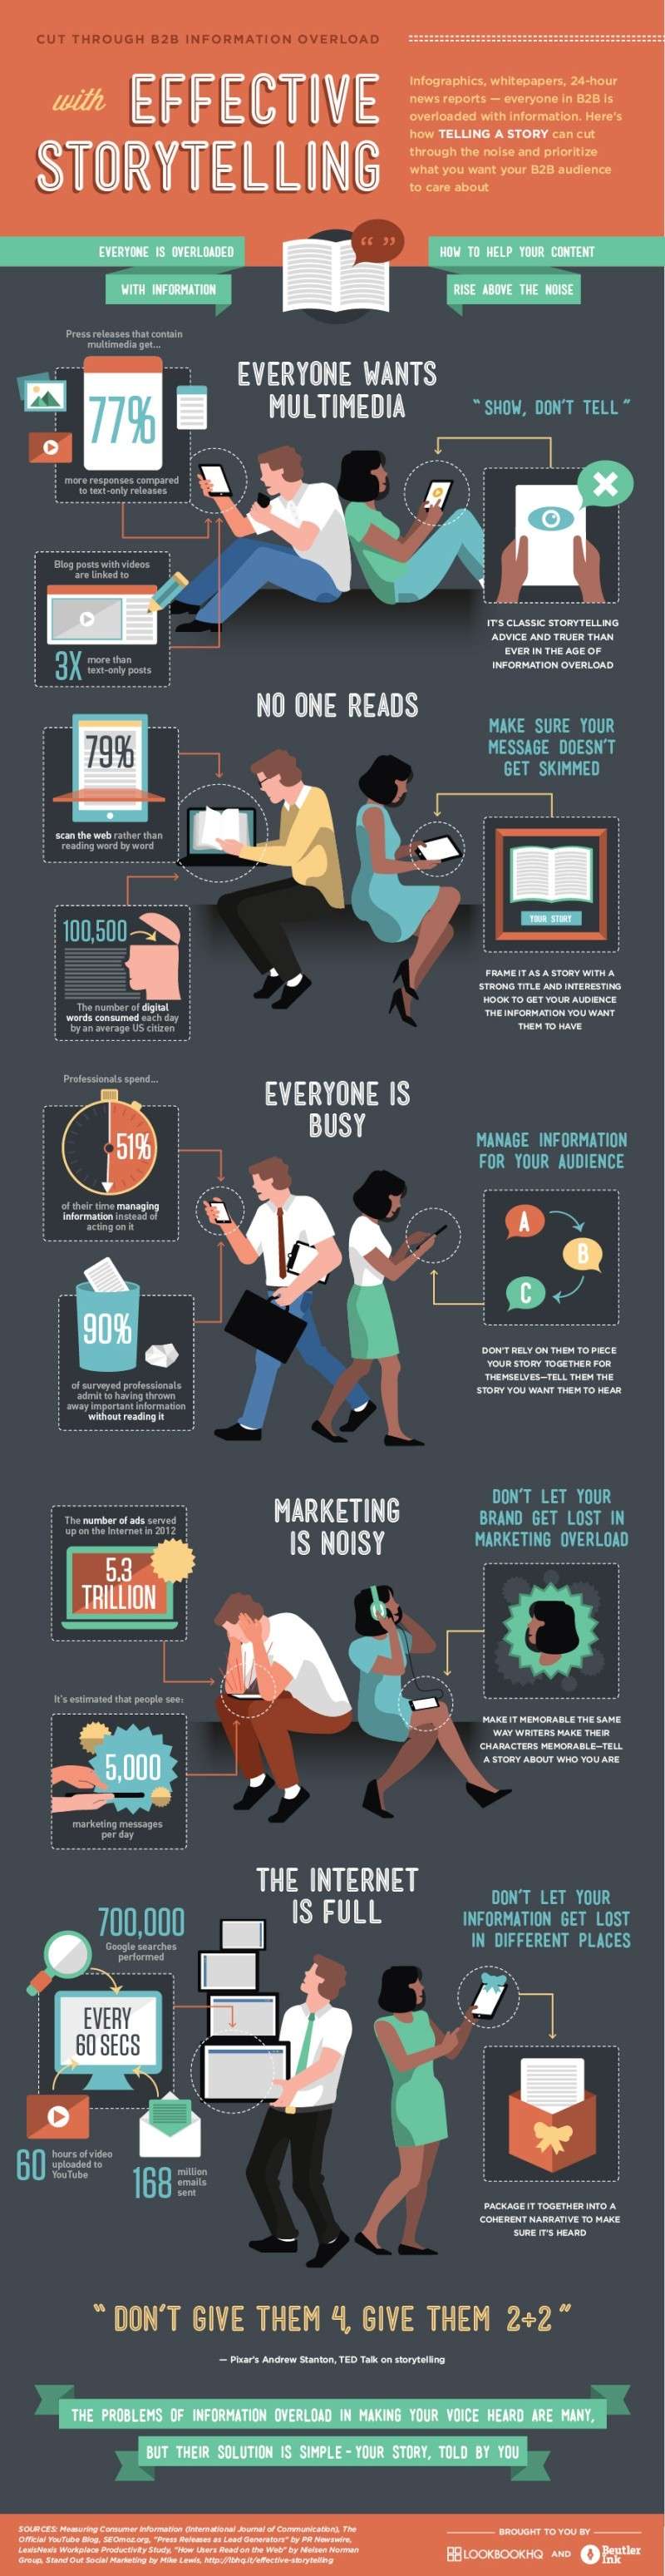 The Secret to Marketing to Busy People Who Don't Have Time to Read (Infographic)  Why-st10